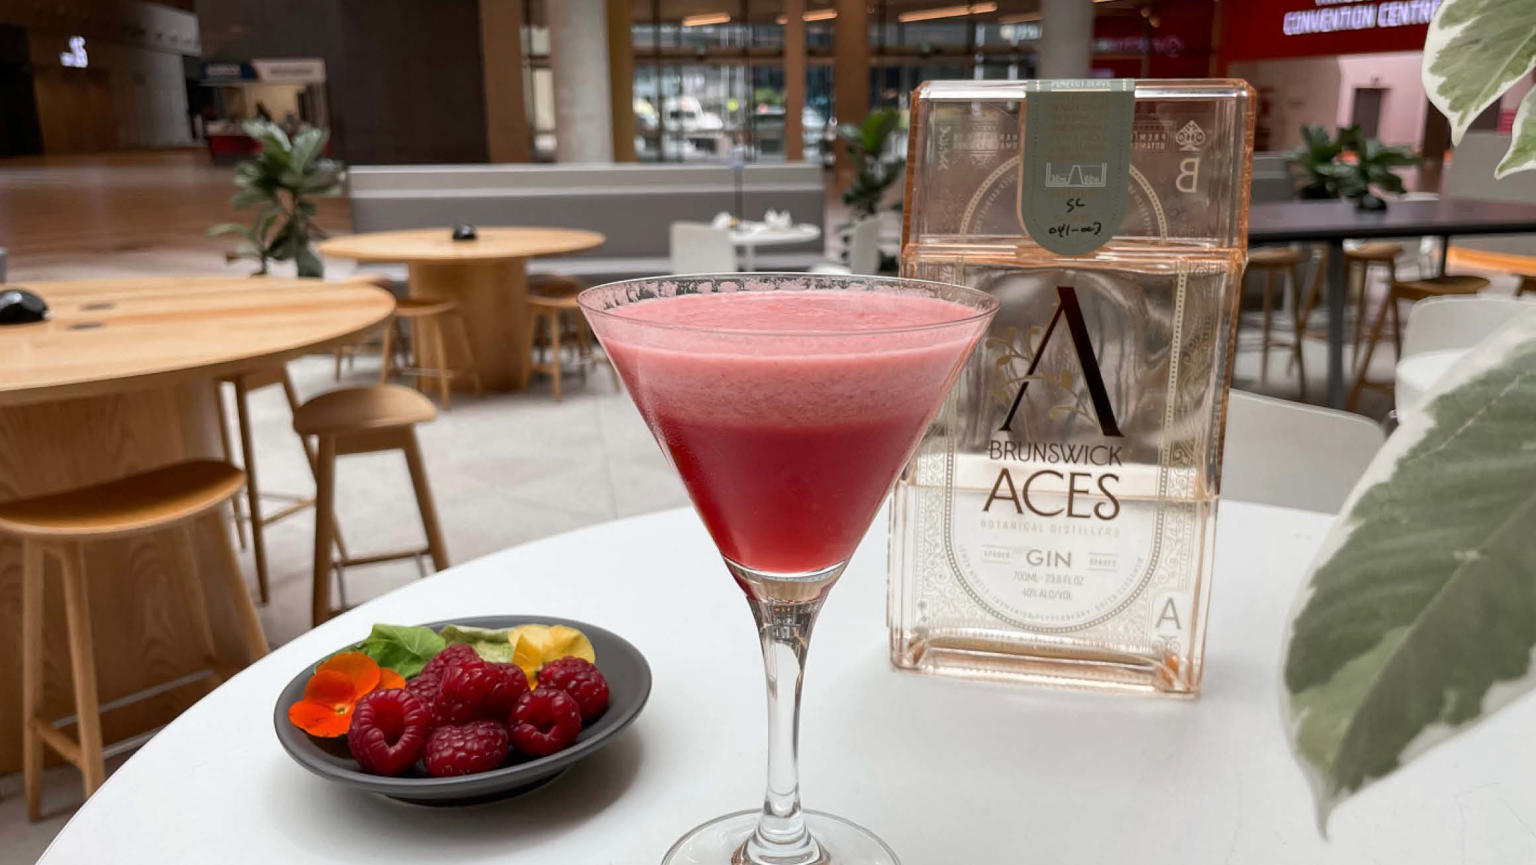 A vibrant pink cocktail fills a cocktail glass, topped with frothy foam, placed on a white round table. Adjacent to it, a small grey bowl holds raspberries, while an orange-tinted rectangular glass bottle stands nearby. In the background, round wooden tables with matching chairs create a cosy cafe atmosphere, while green leaves in the foreground add a touch of natural beauty.